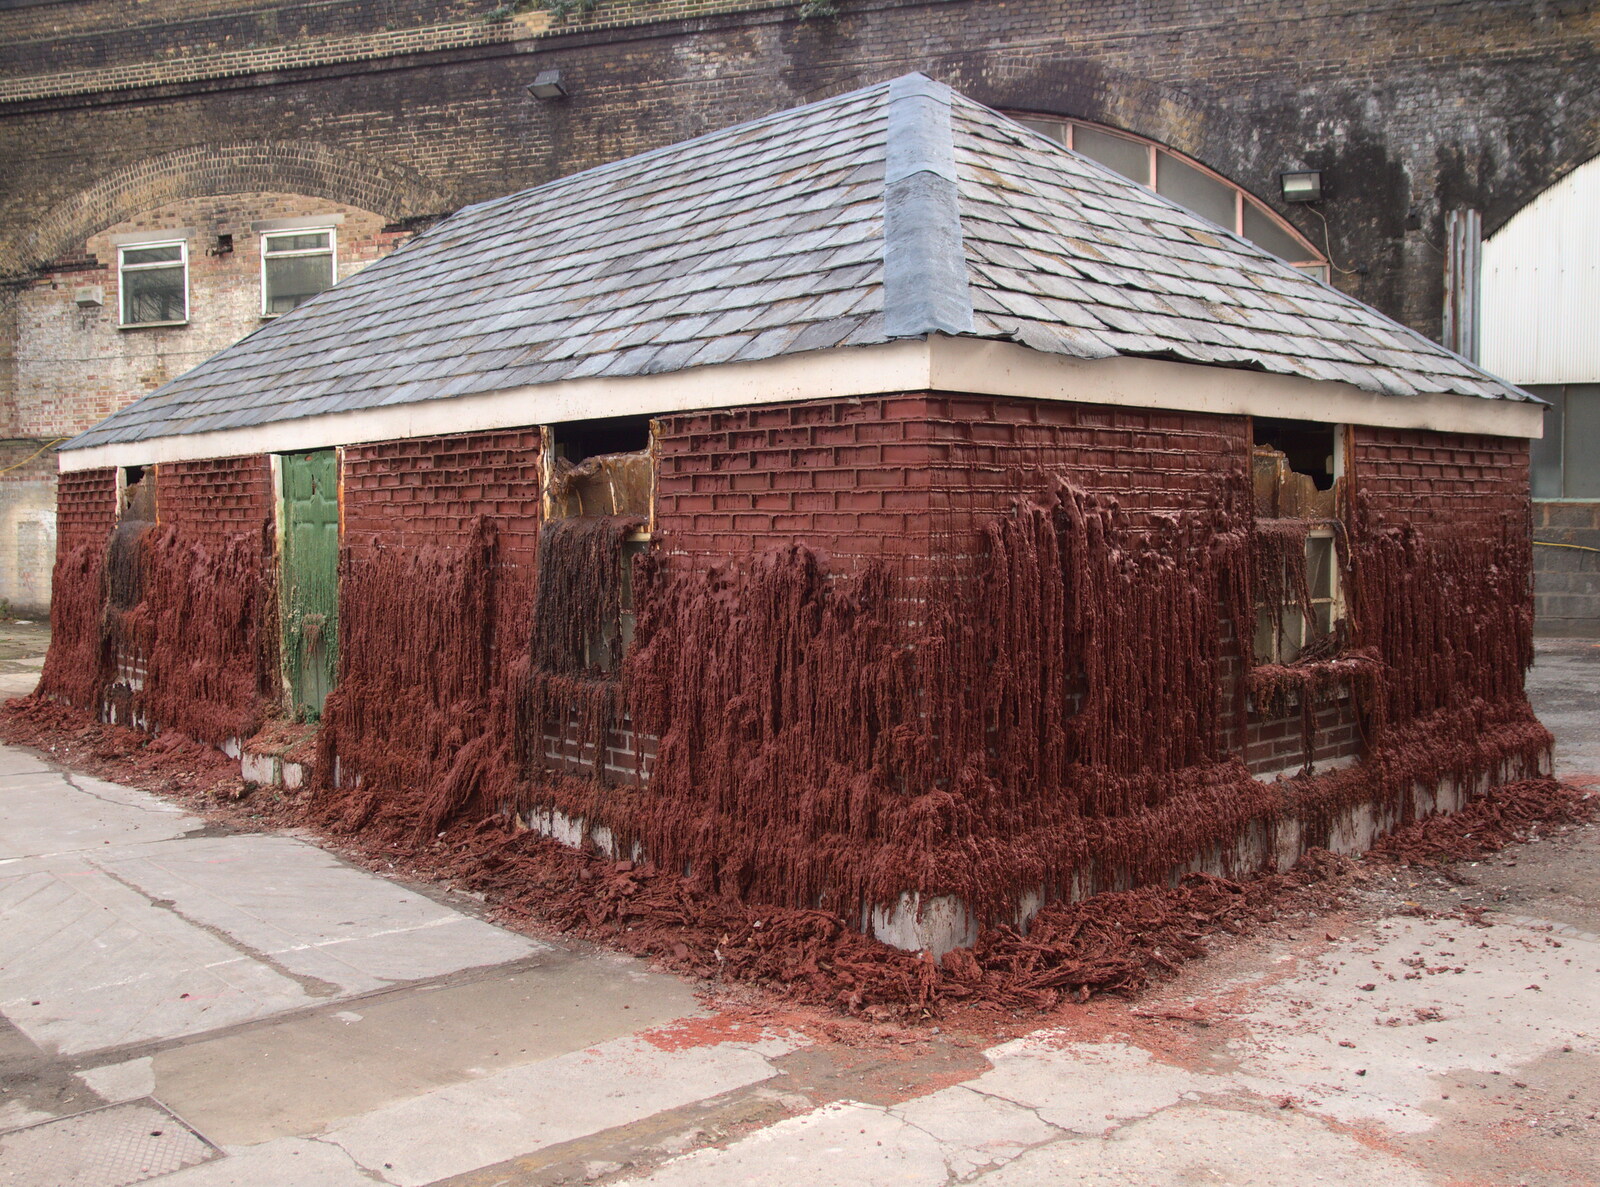 The melting house of wax from A Melting House Made of Wax, Southwark, London - 12th November 2014